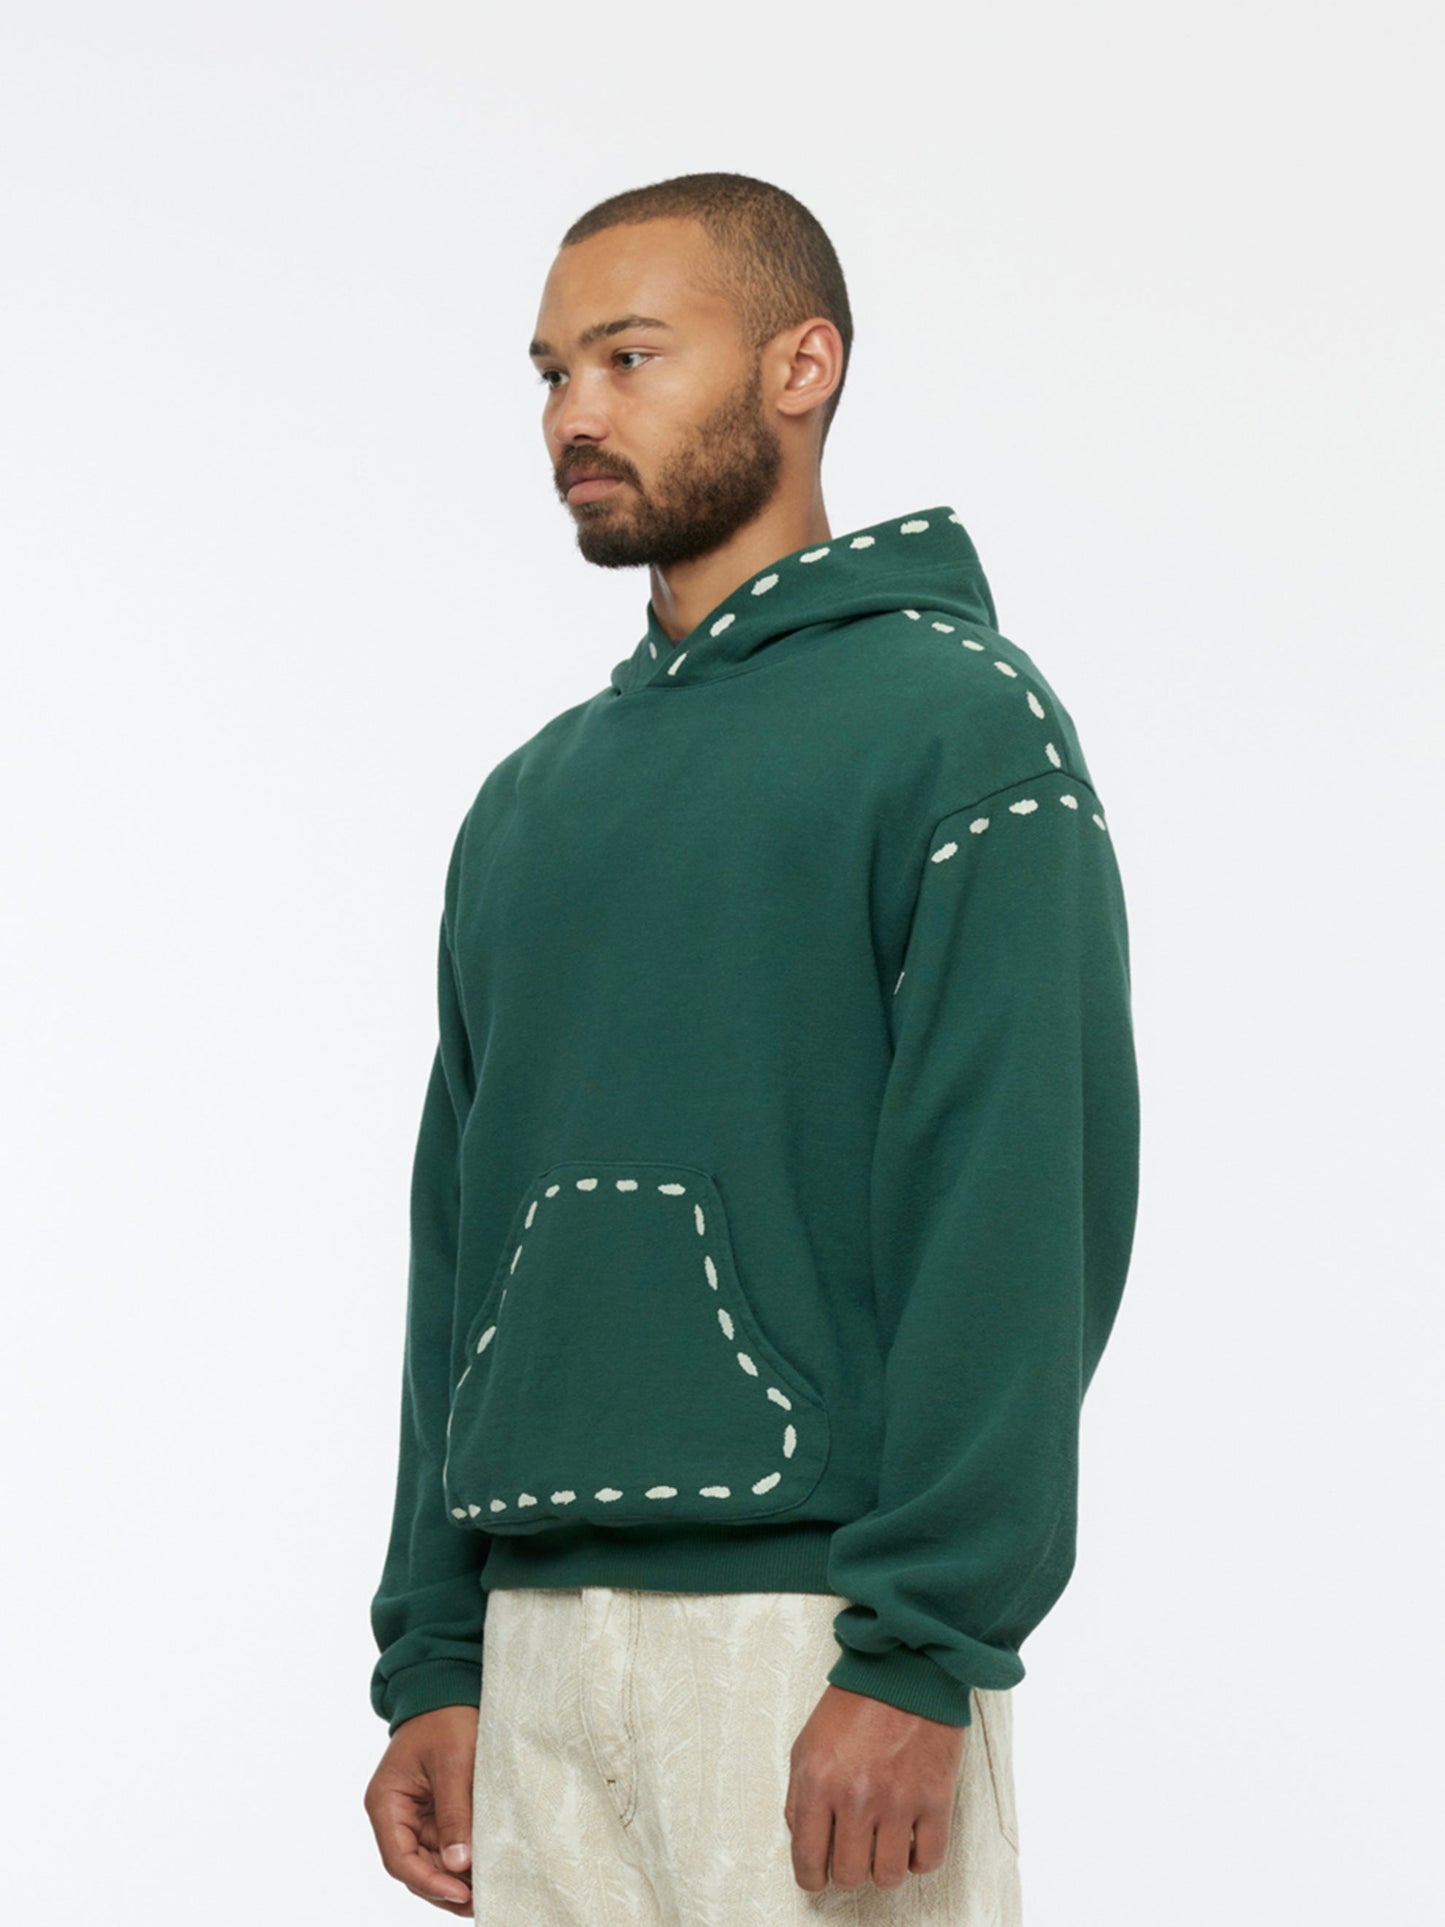 Marionette Knit Hoodie (Green)